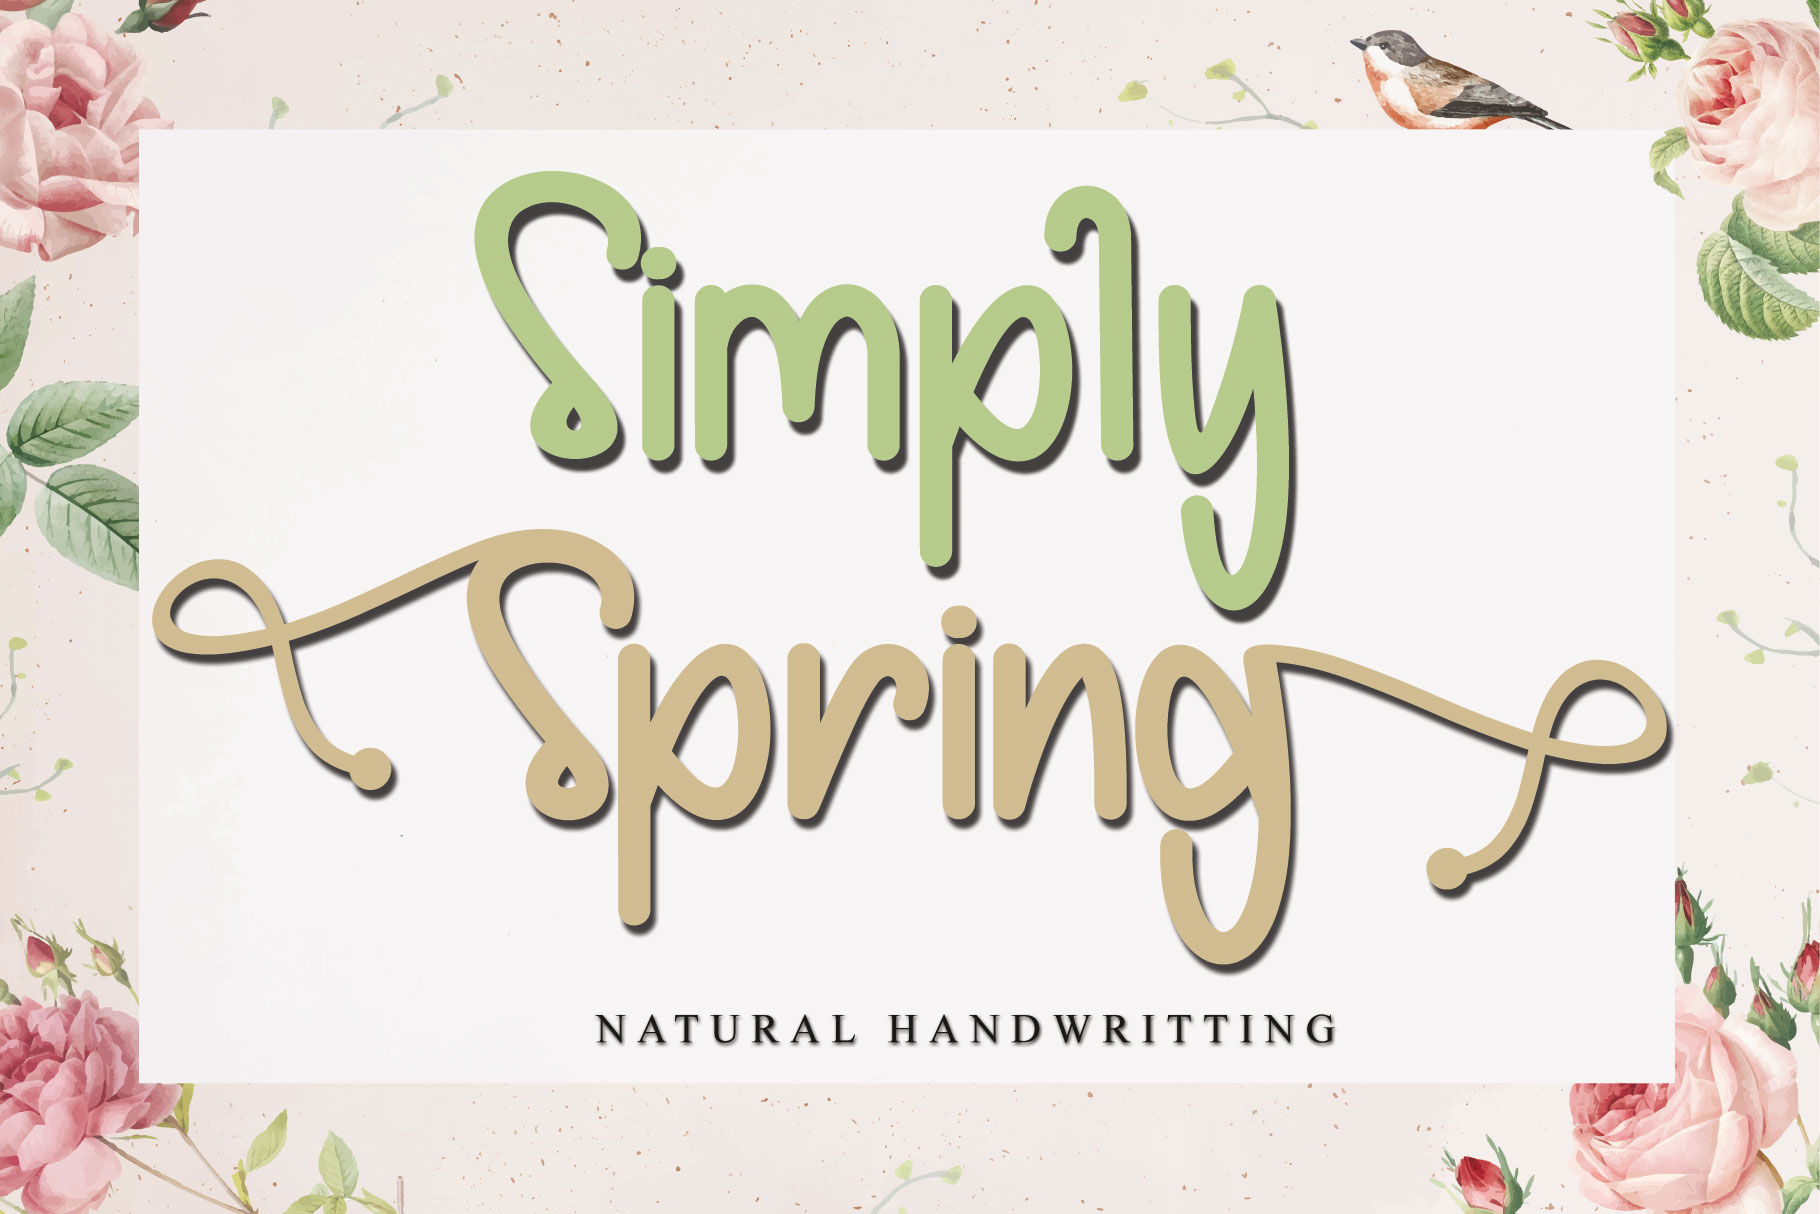 Simply Spring - PERSONALUSE